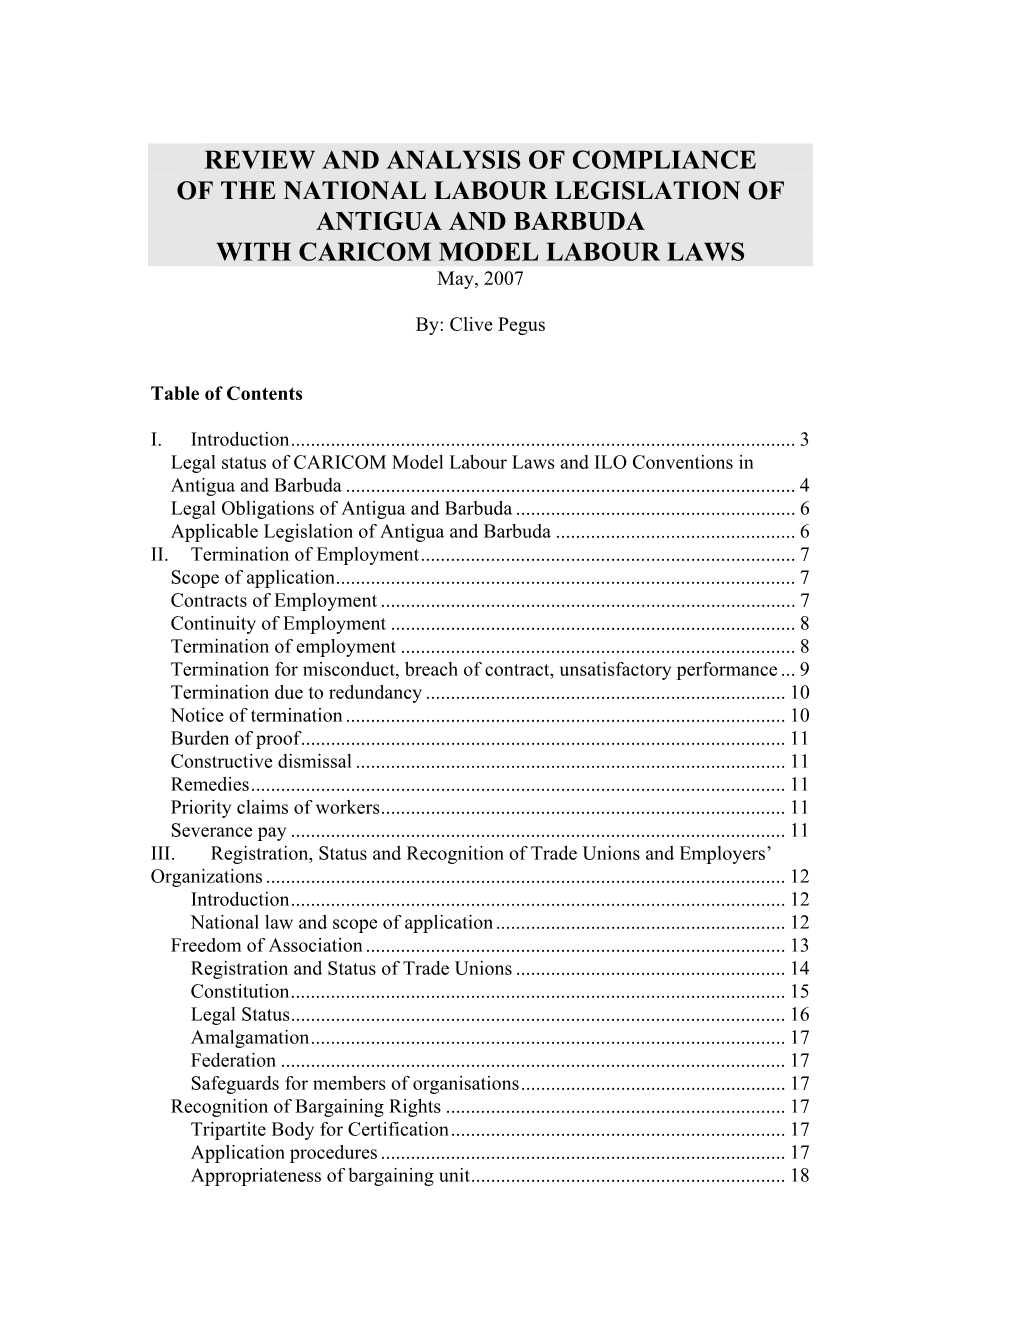 REVIEW and ANALYSIS of COMPLIANCE of the NATIONAL LABOUR LEGISLATION of ANTIGUA and BARBUDA with CARICOM MODEL LABOUR LAWS May, 2007